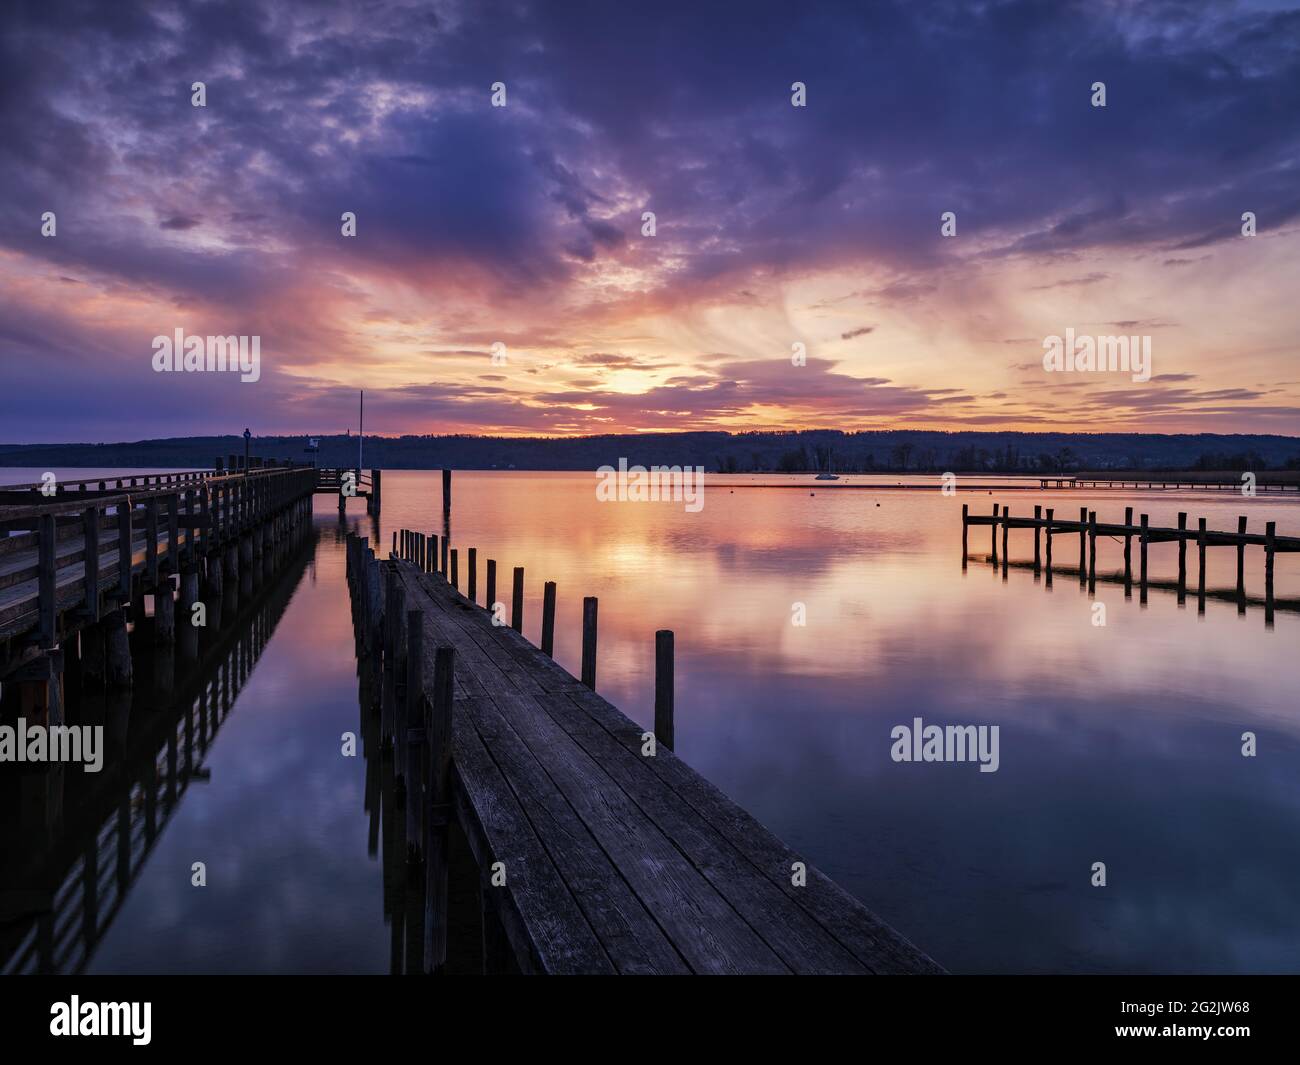 Lake, standing water, lakeshore, Steeg, jetty, Bayerdießen, Bavarian foothills, sunrise, dawn, clouds, colored clouds, reflection, southern Ammersee, bank promenade, promenade Stock Photo